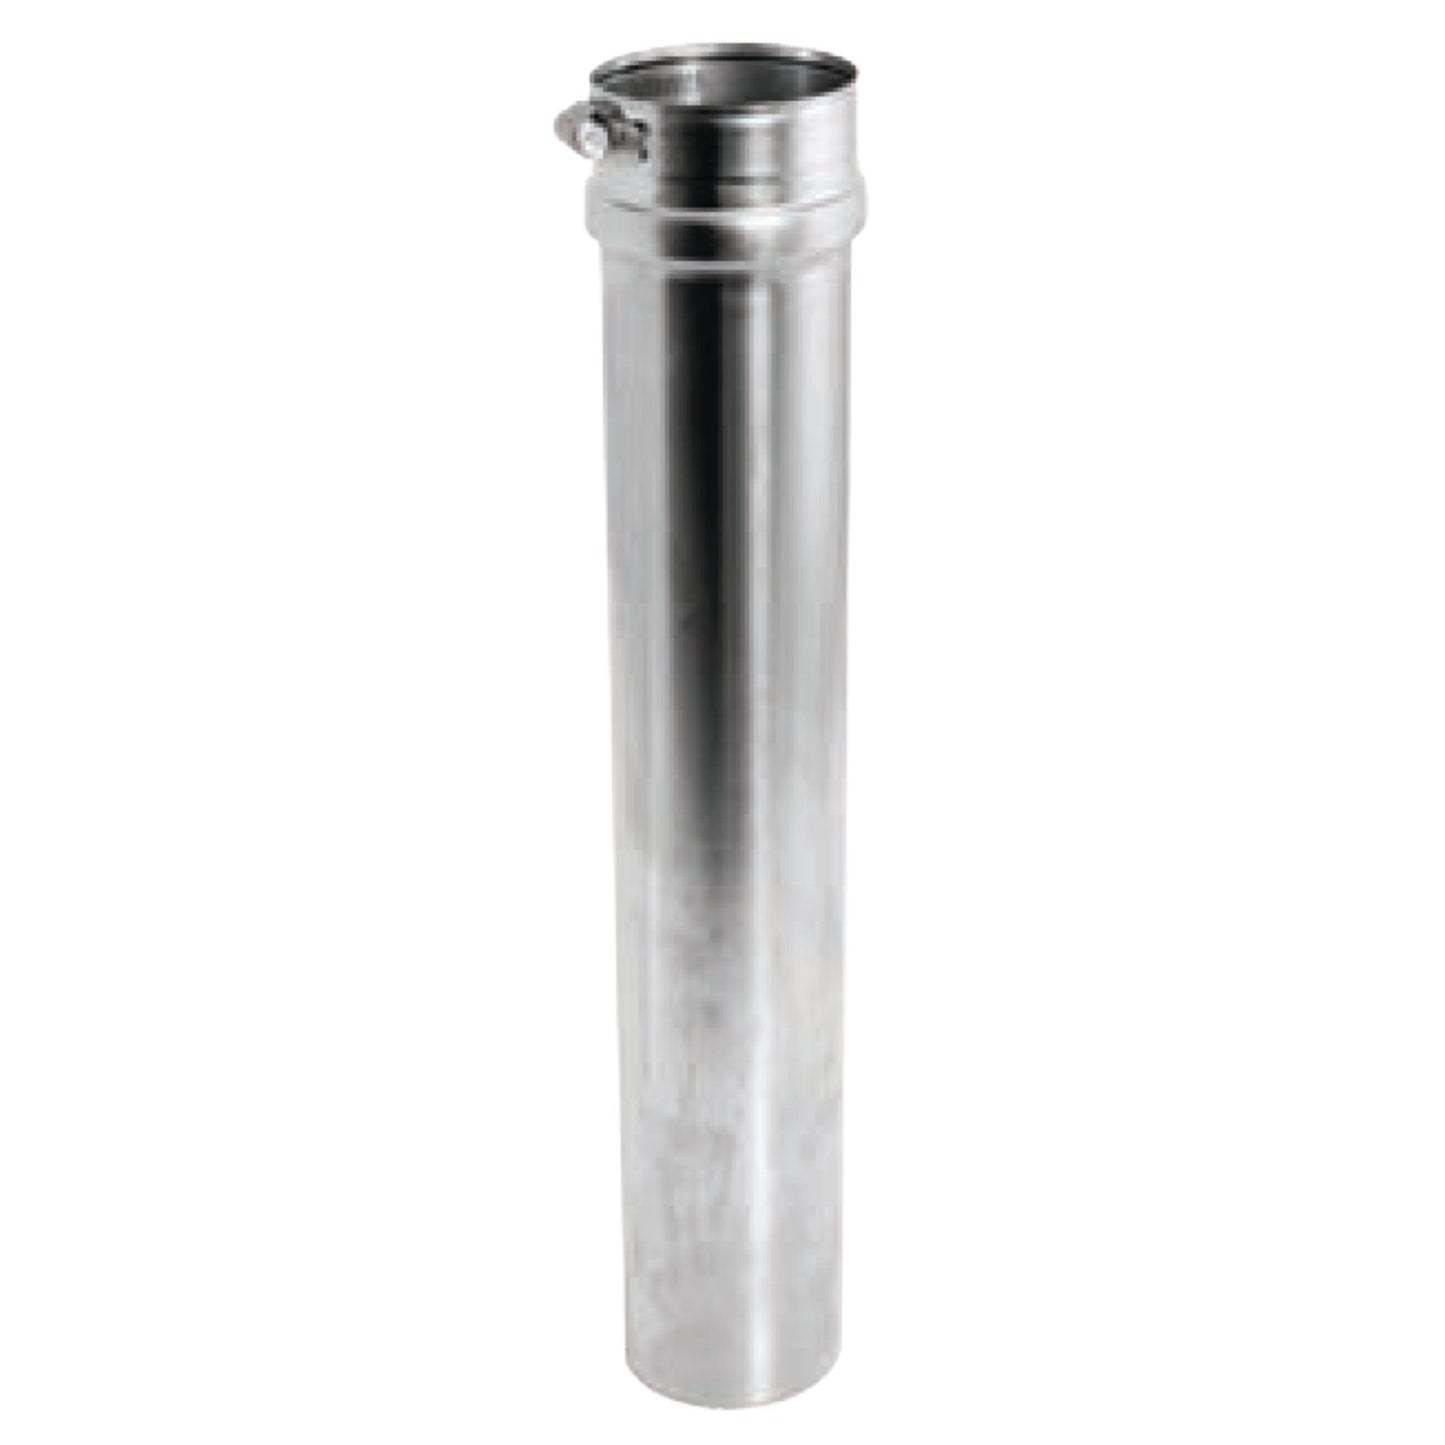 DuraVent FasNSeal 12" x 18" 316L Stainless Steel Adjustable Vent Length